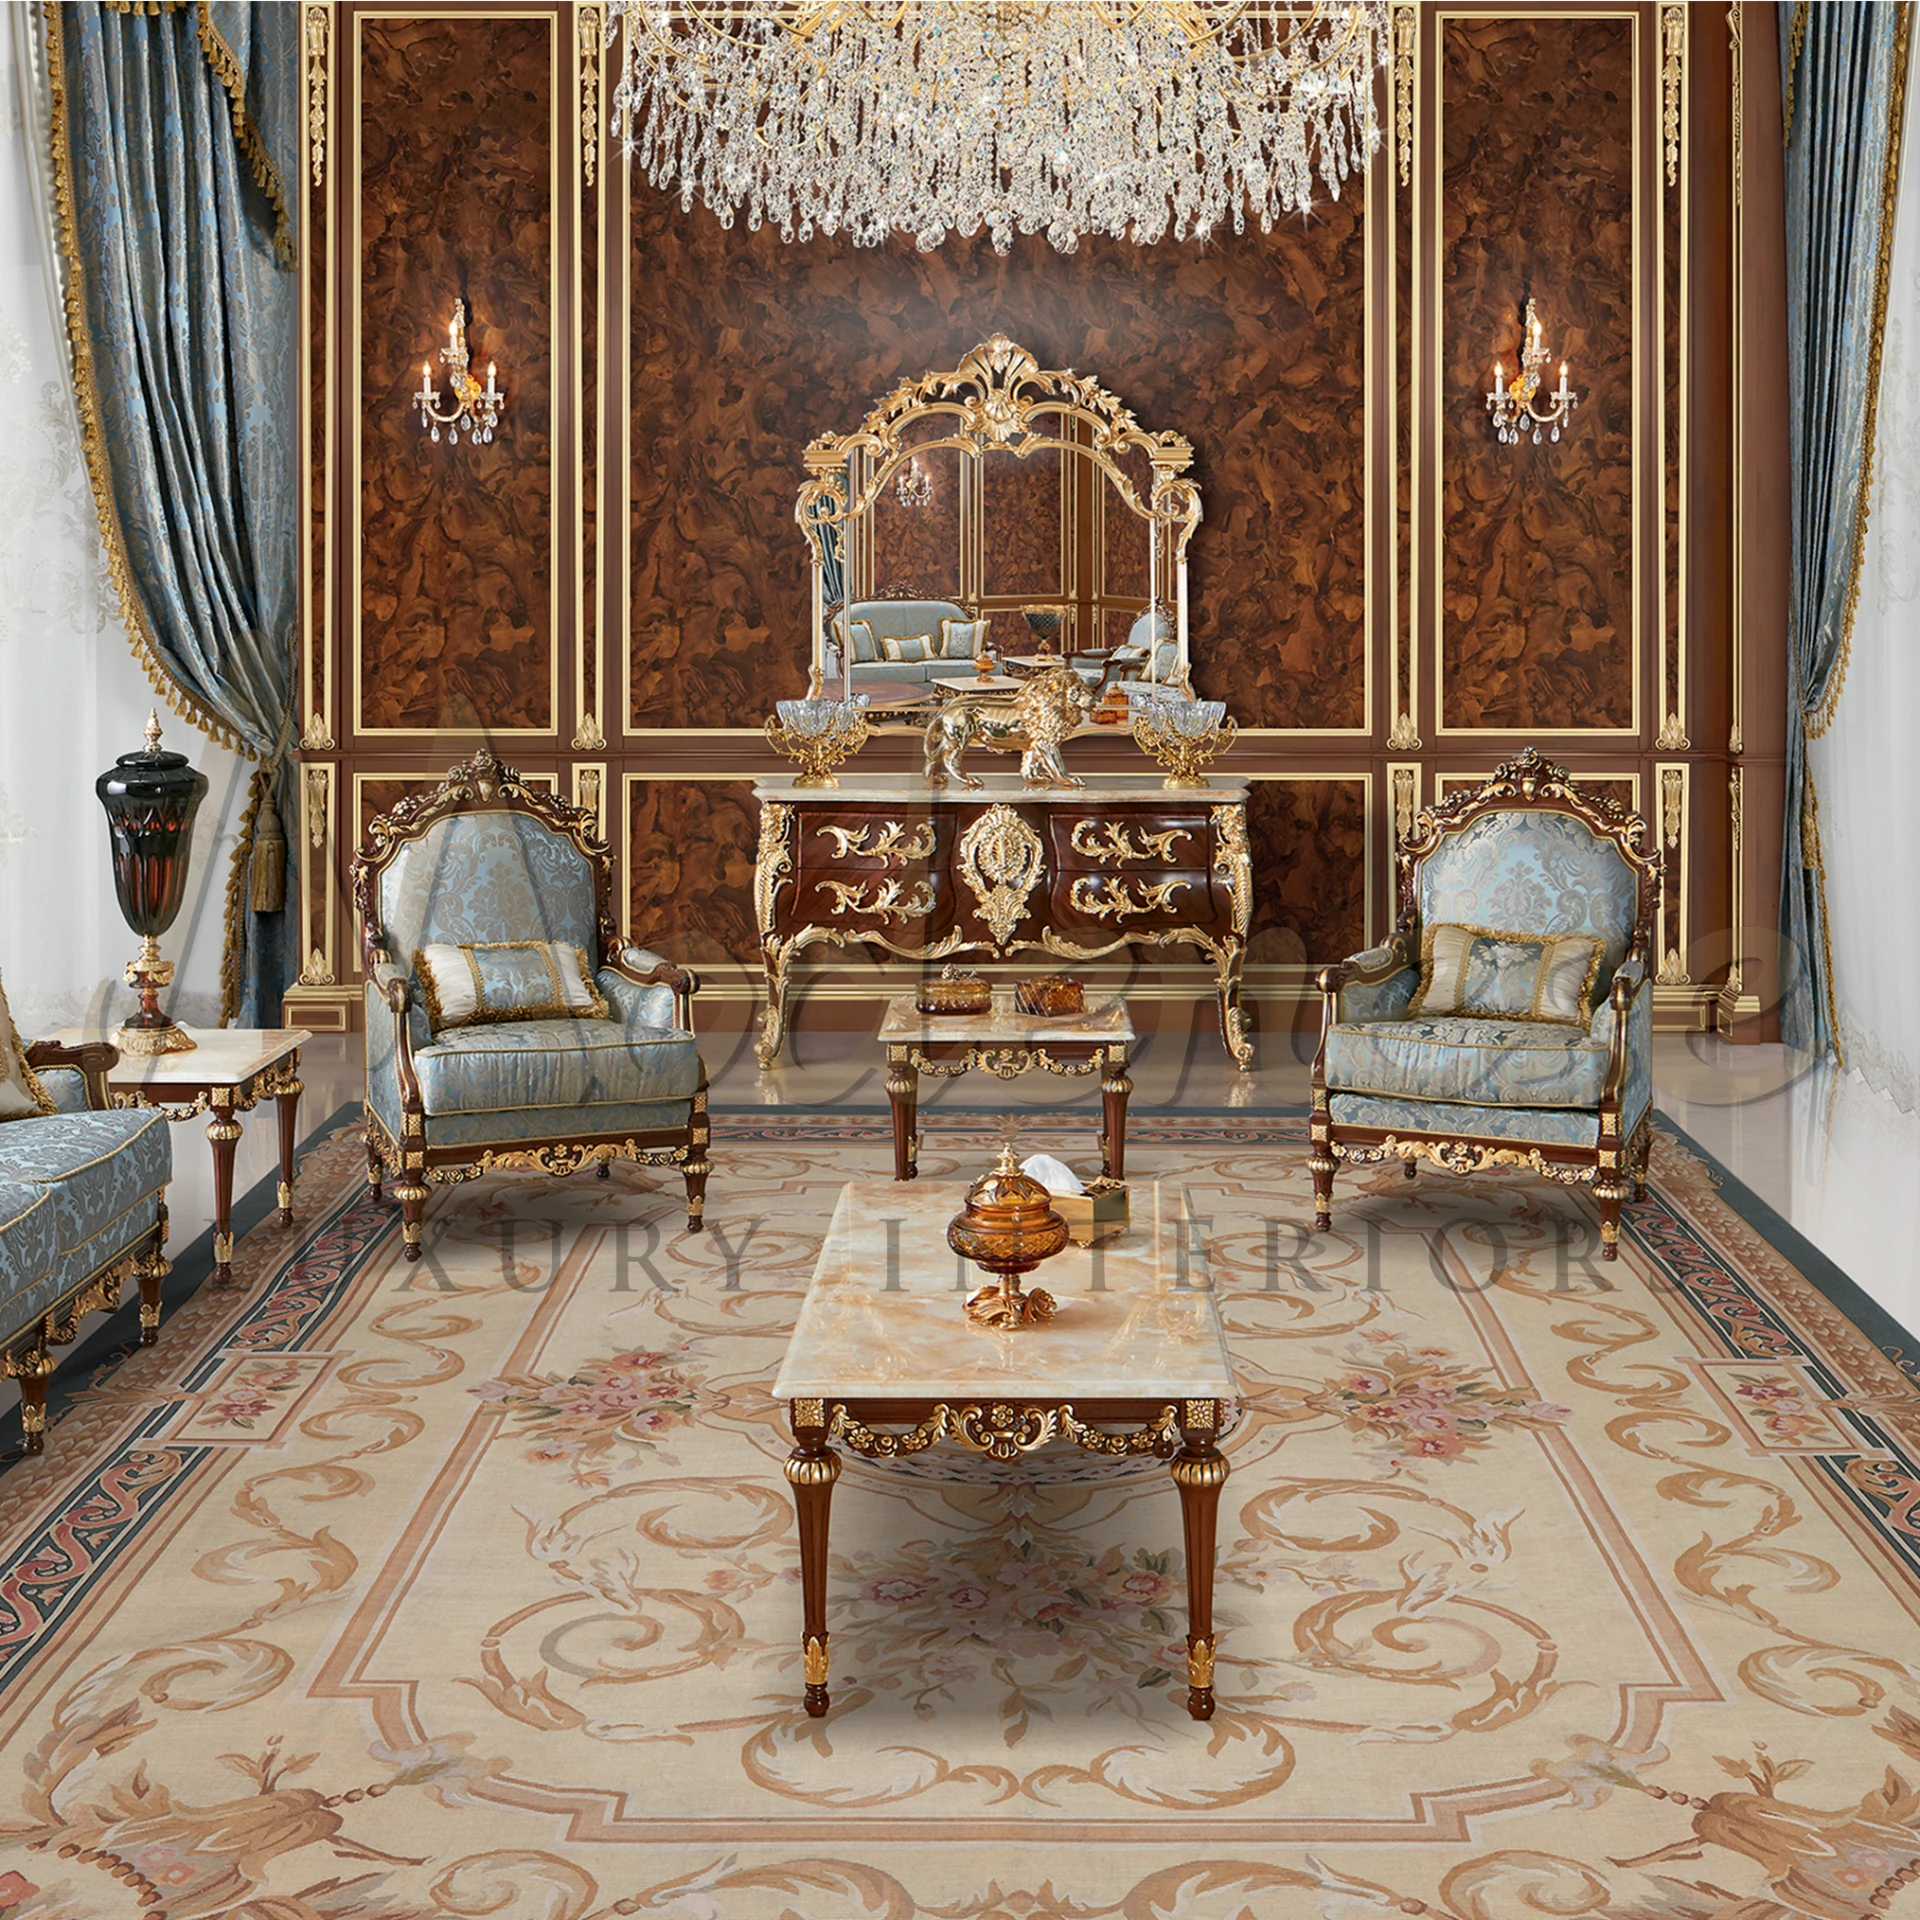 A luxurious room with golden fancy furniture, a grand chandelier, and stylish draperies showcasing luxury.